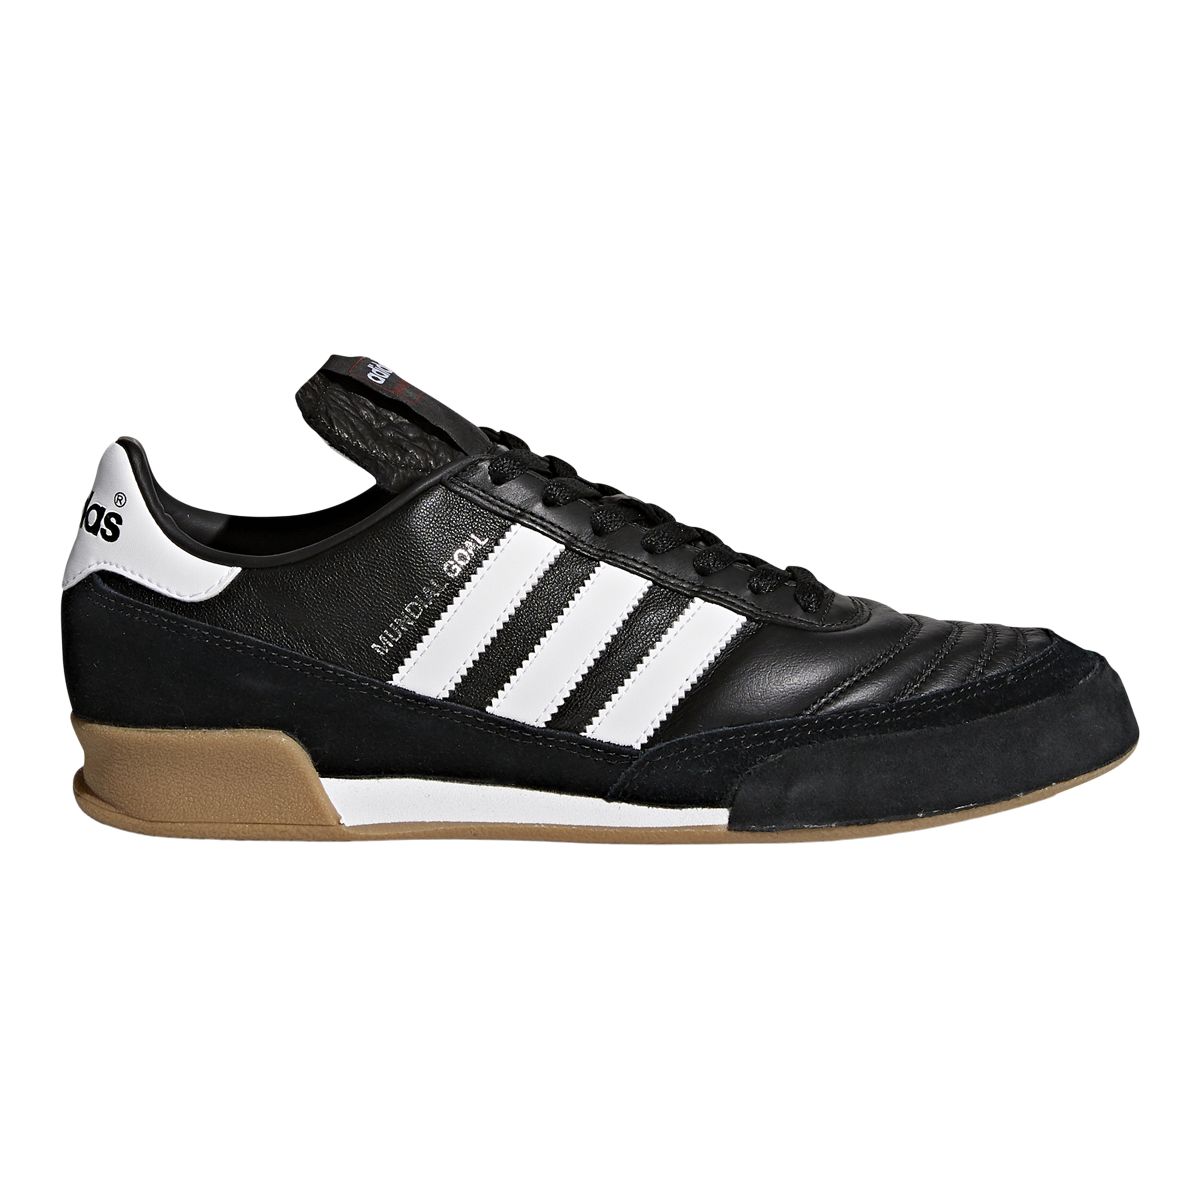 Image of adidas Men's Mundial Goal indoor Soccer Shoes